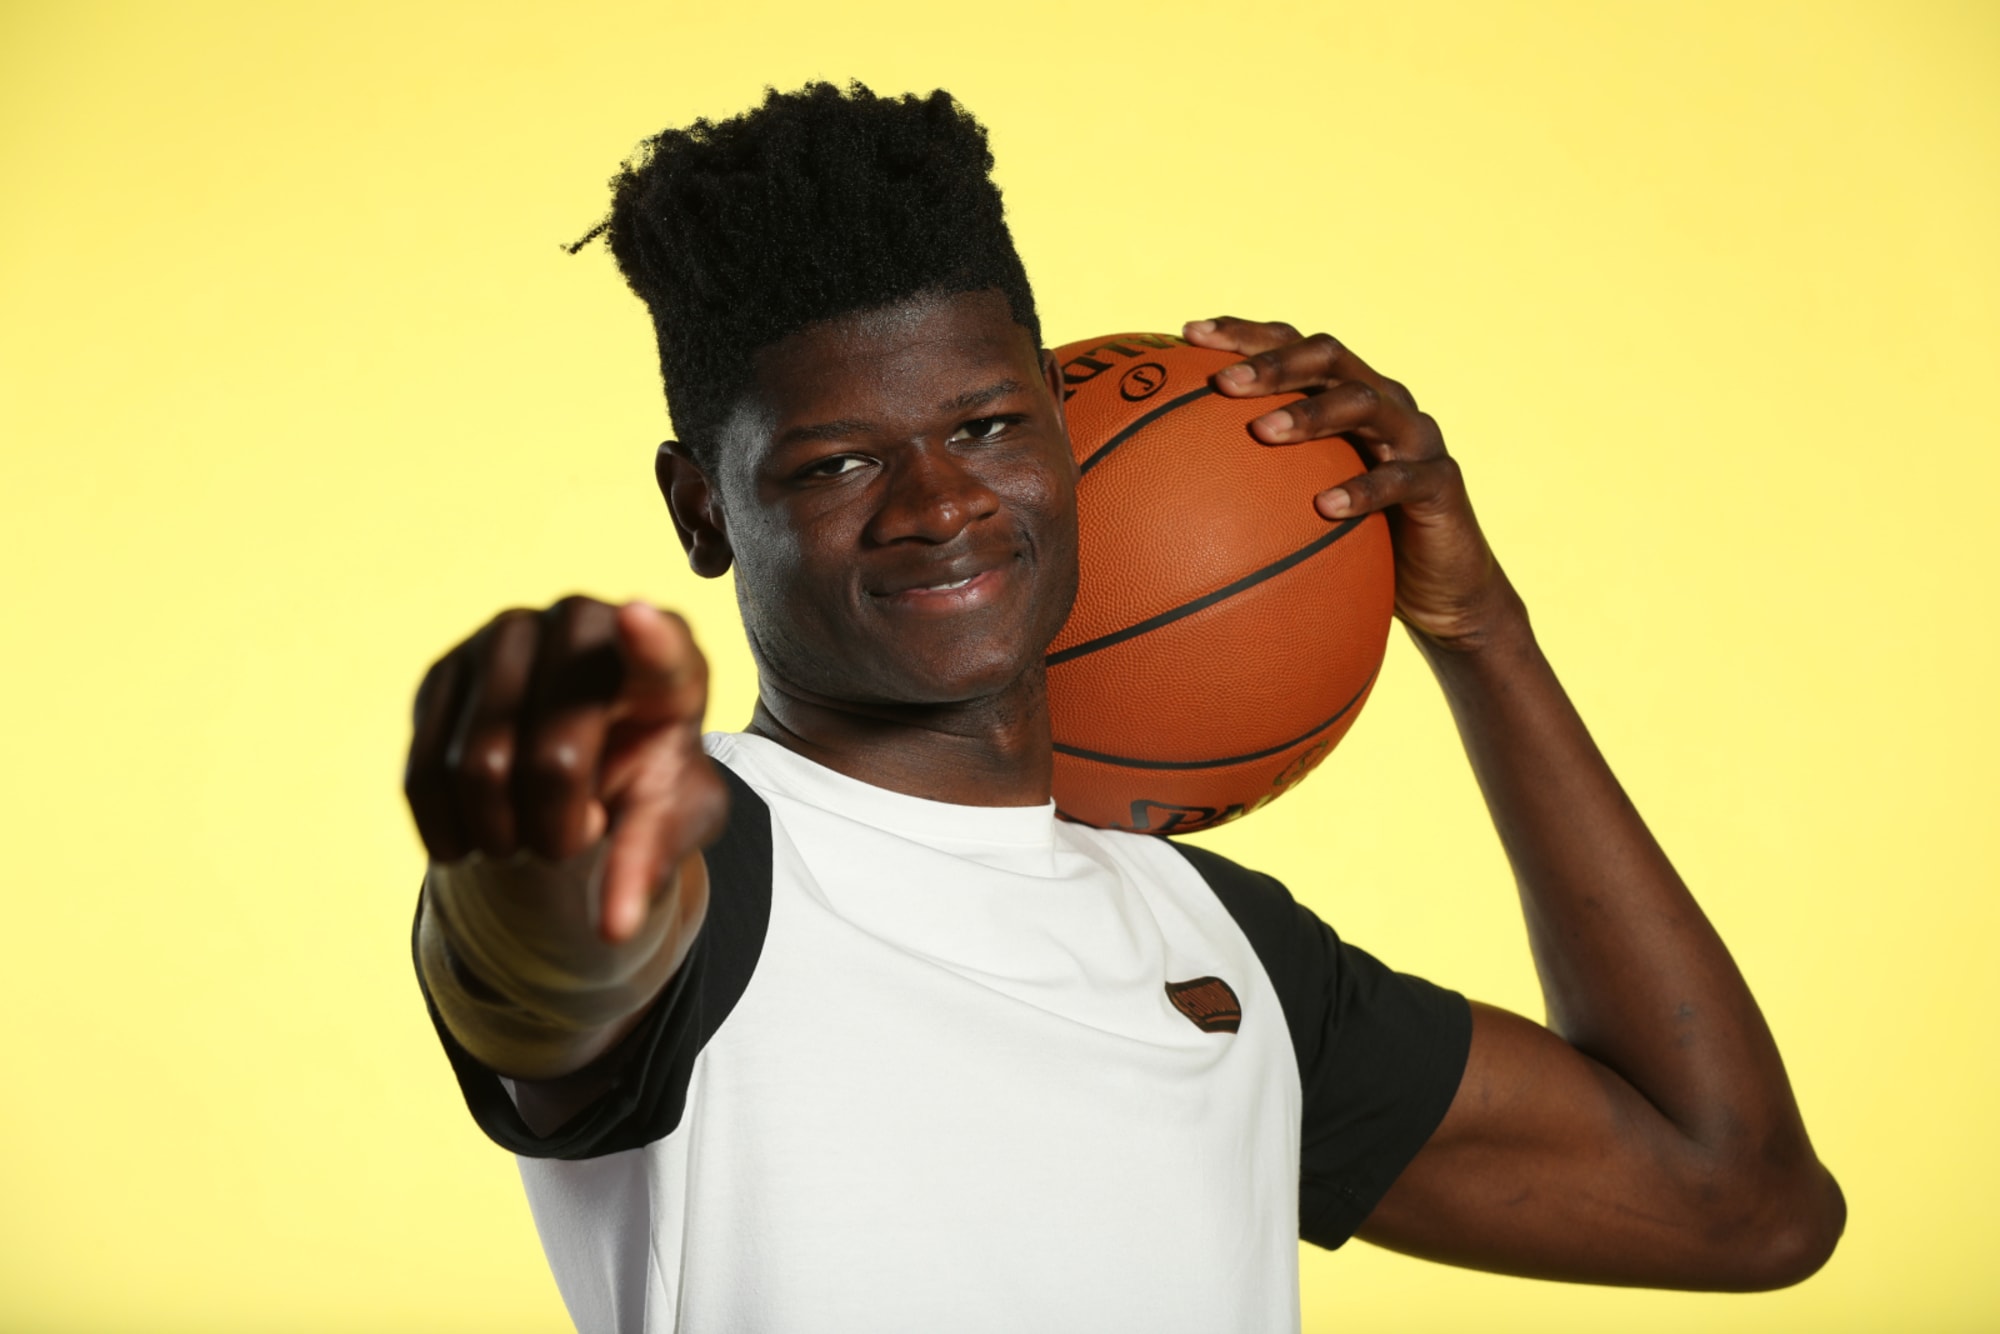 Where does Mo Bamba fit in the draft lottery?